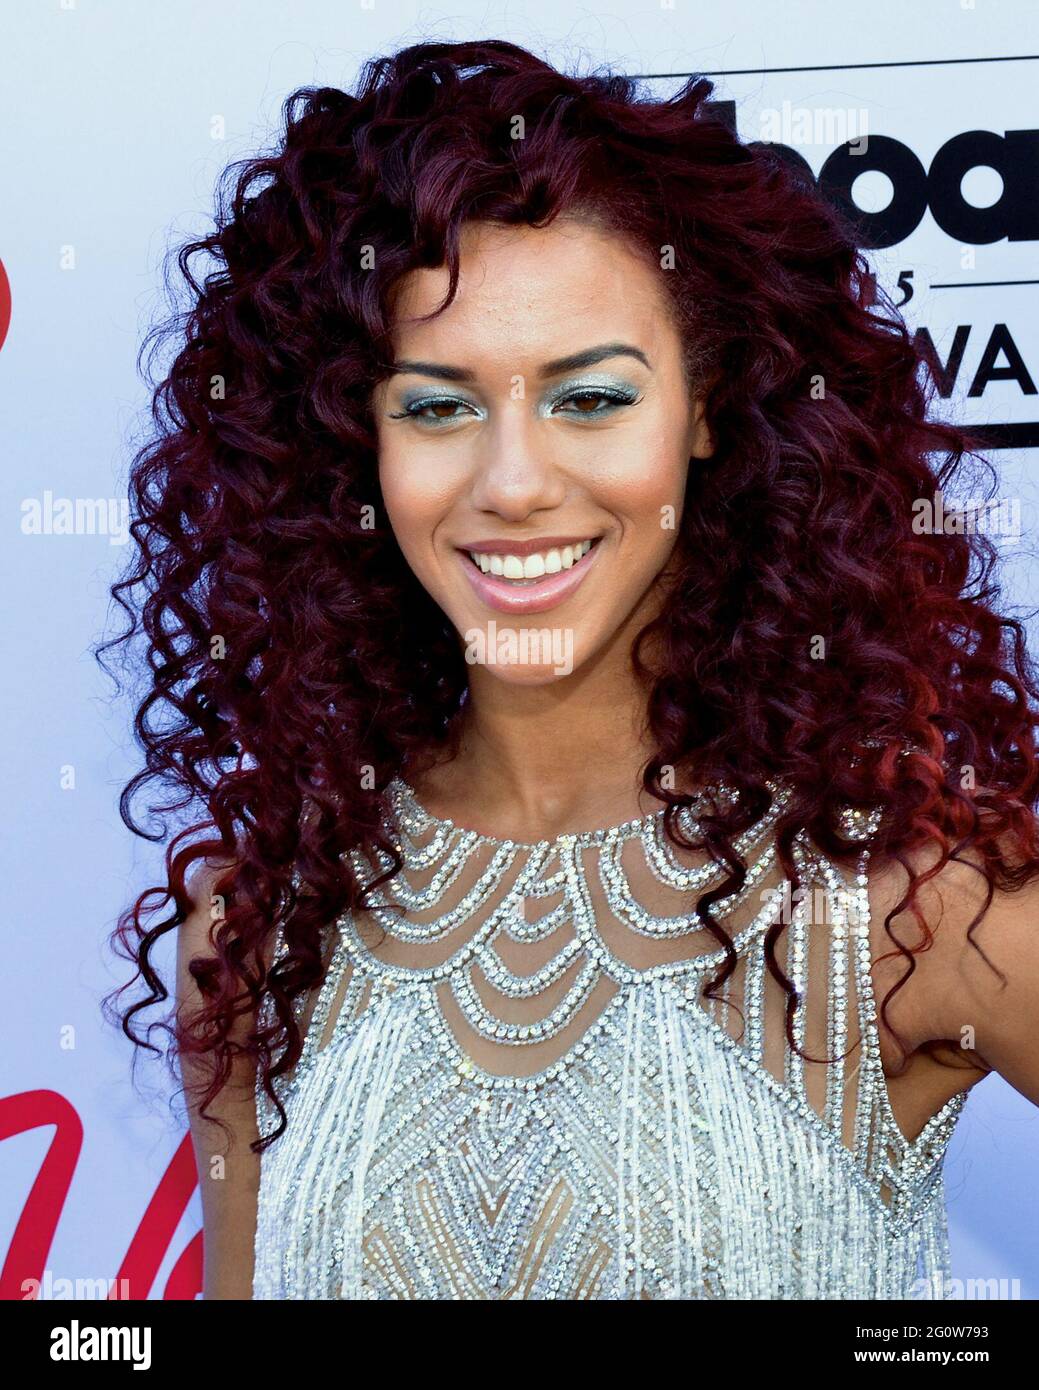 Natalie La Rose High Resolution Stock Photography and Images - Alamy